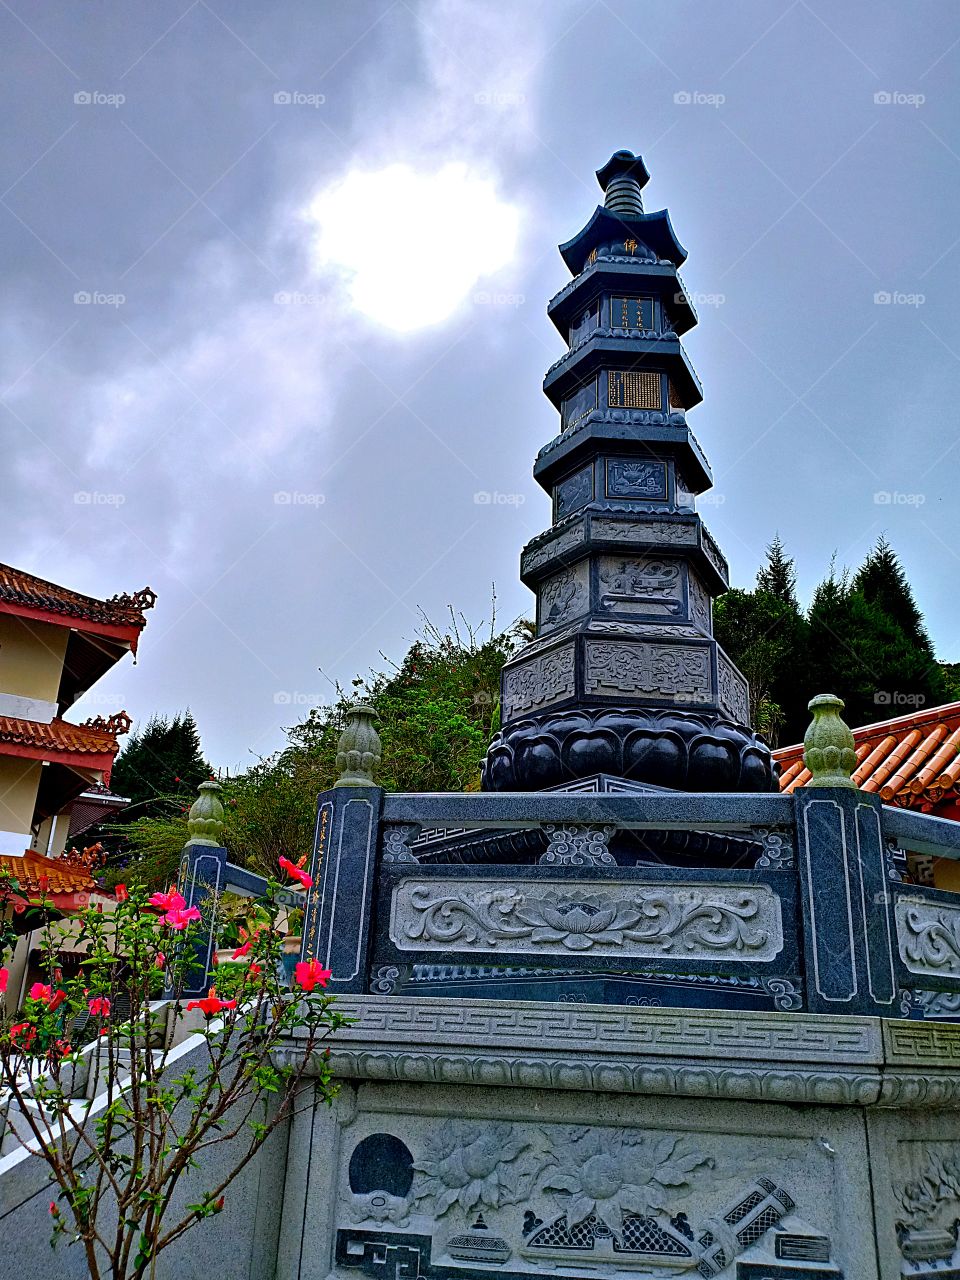 Just another cloudy day at Buddhist temple.. 😇🌥️